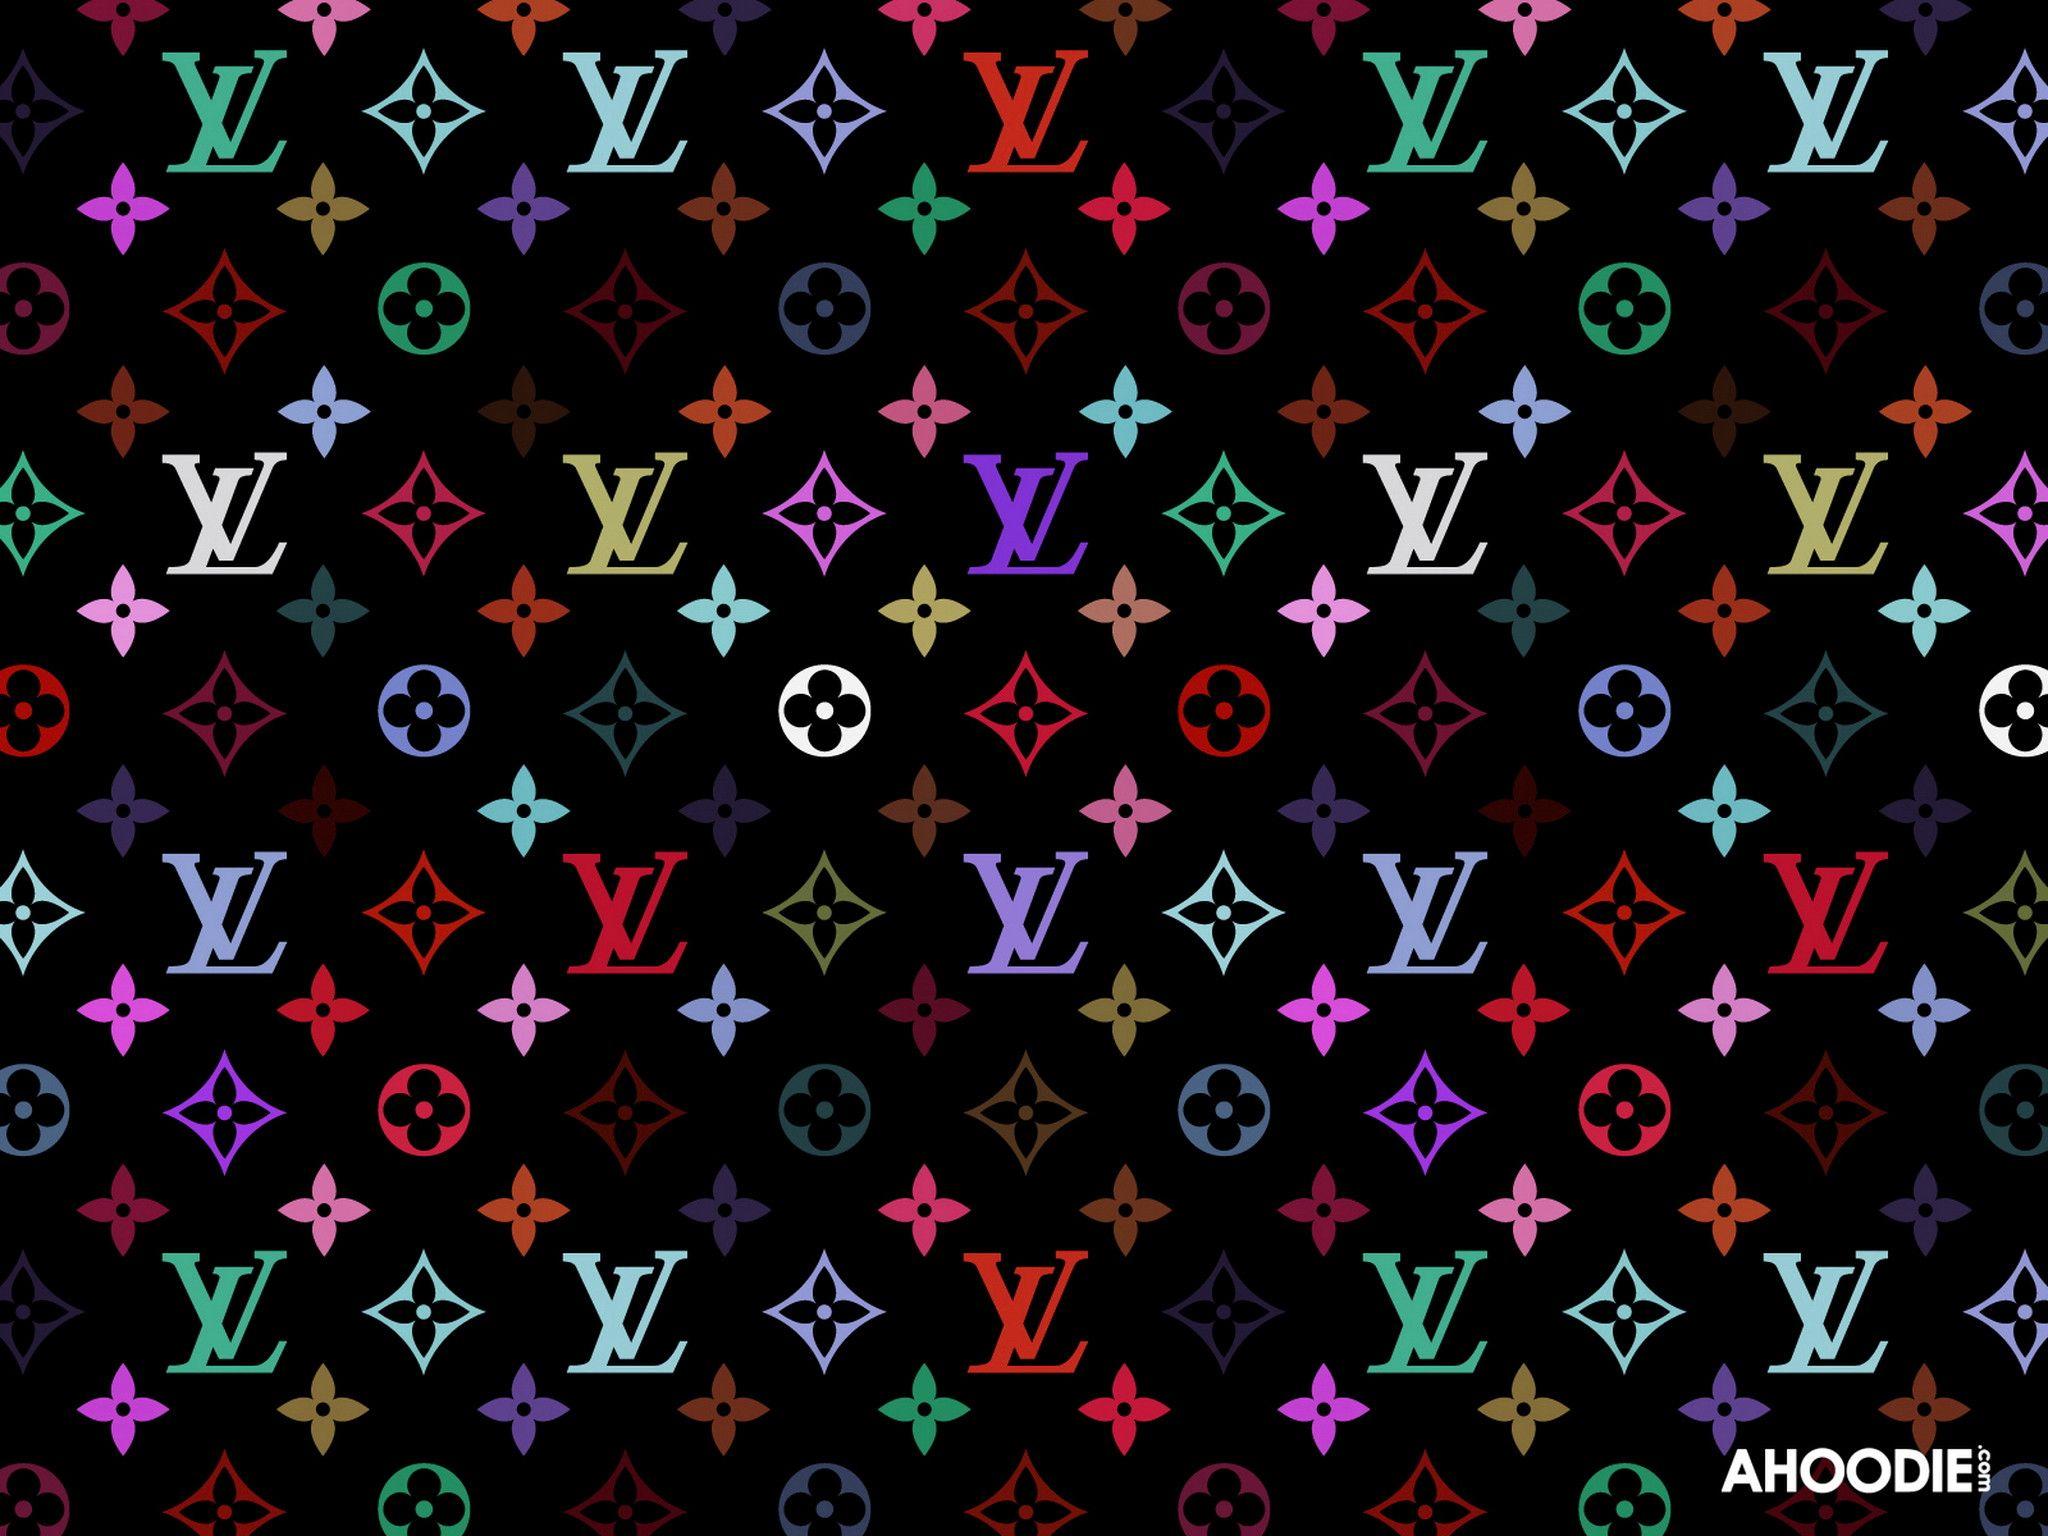 100+] Louis Vuitton Aesthetic Wallpapers